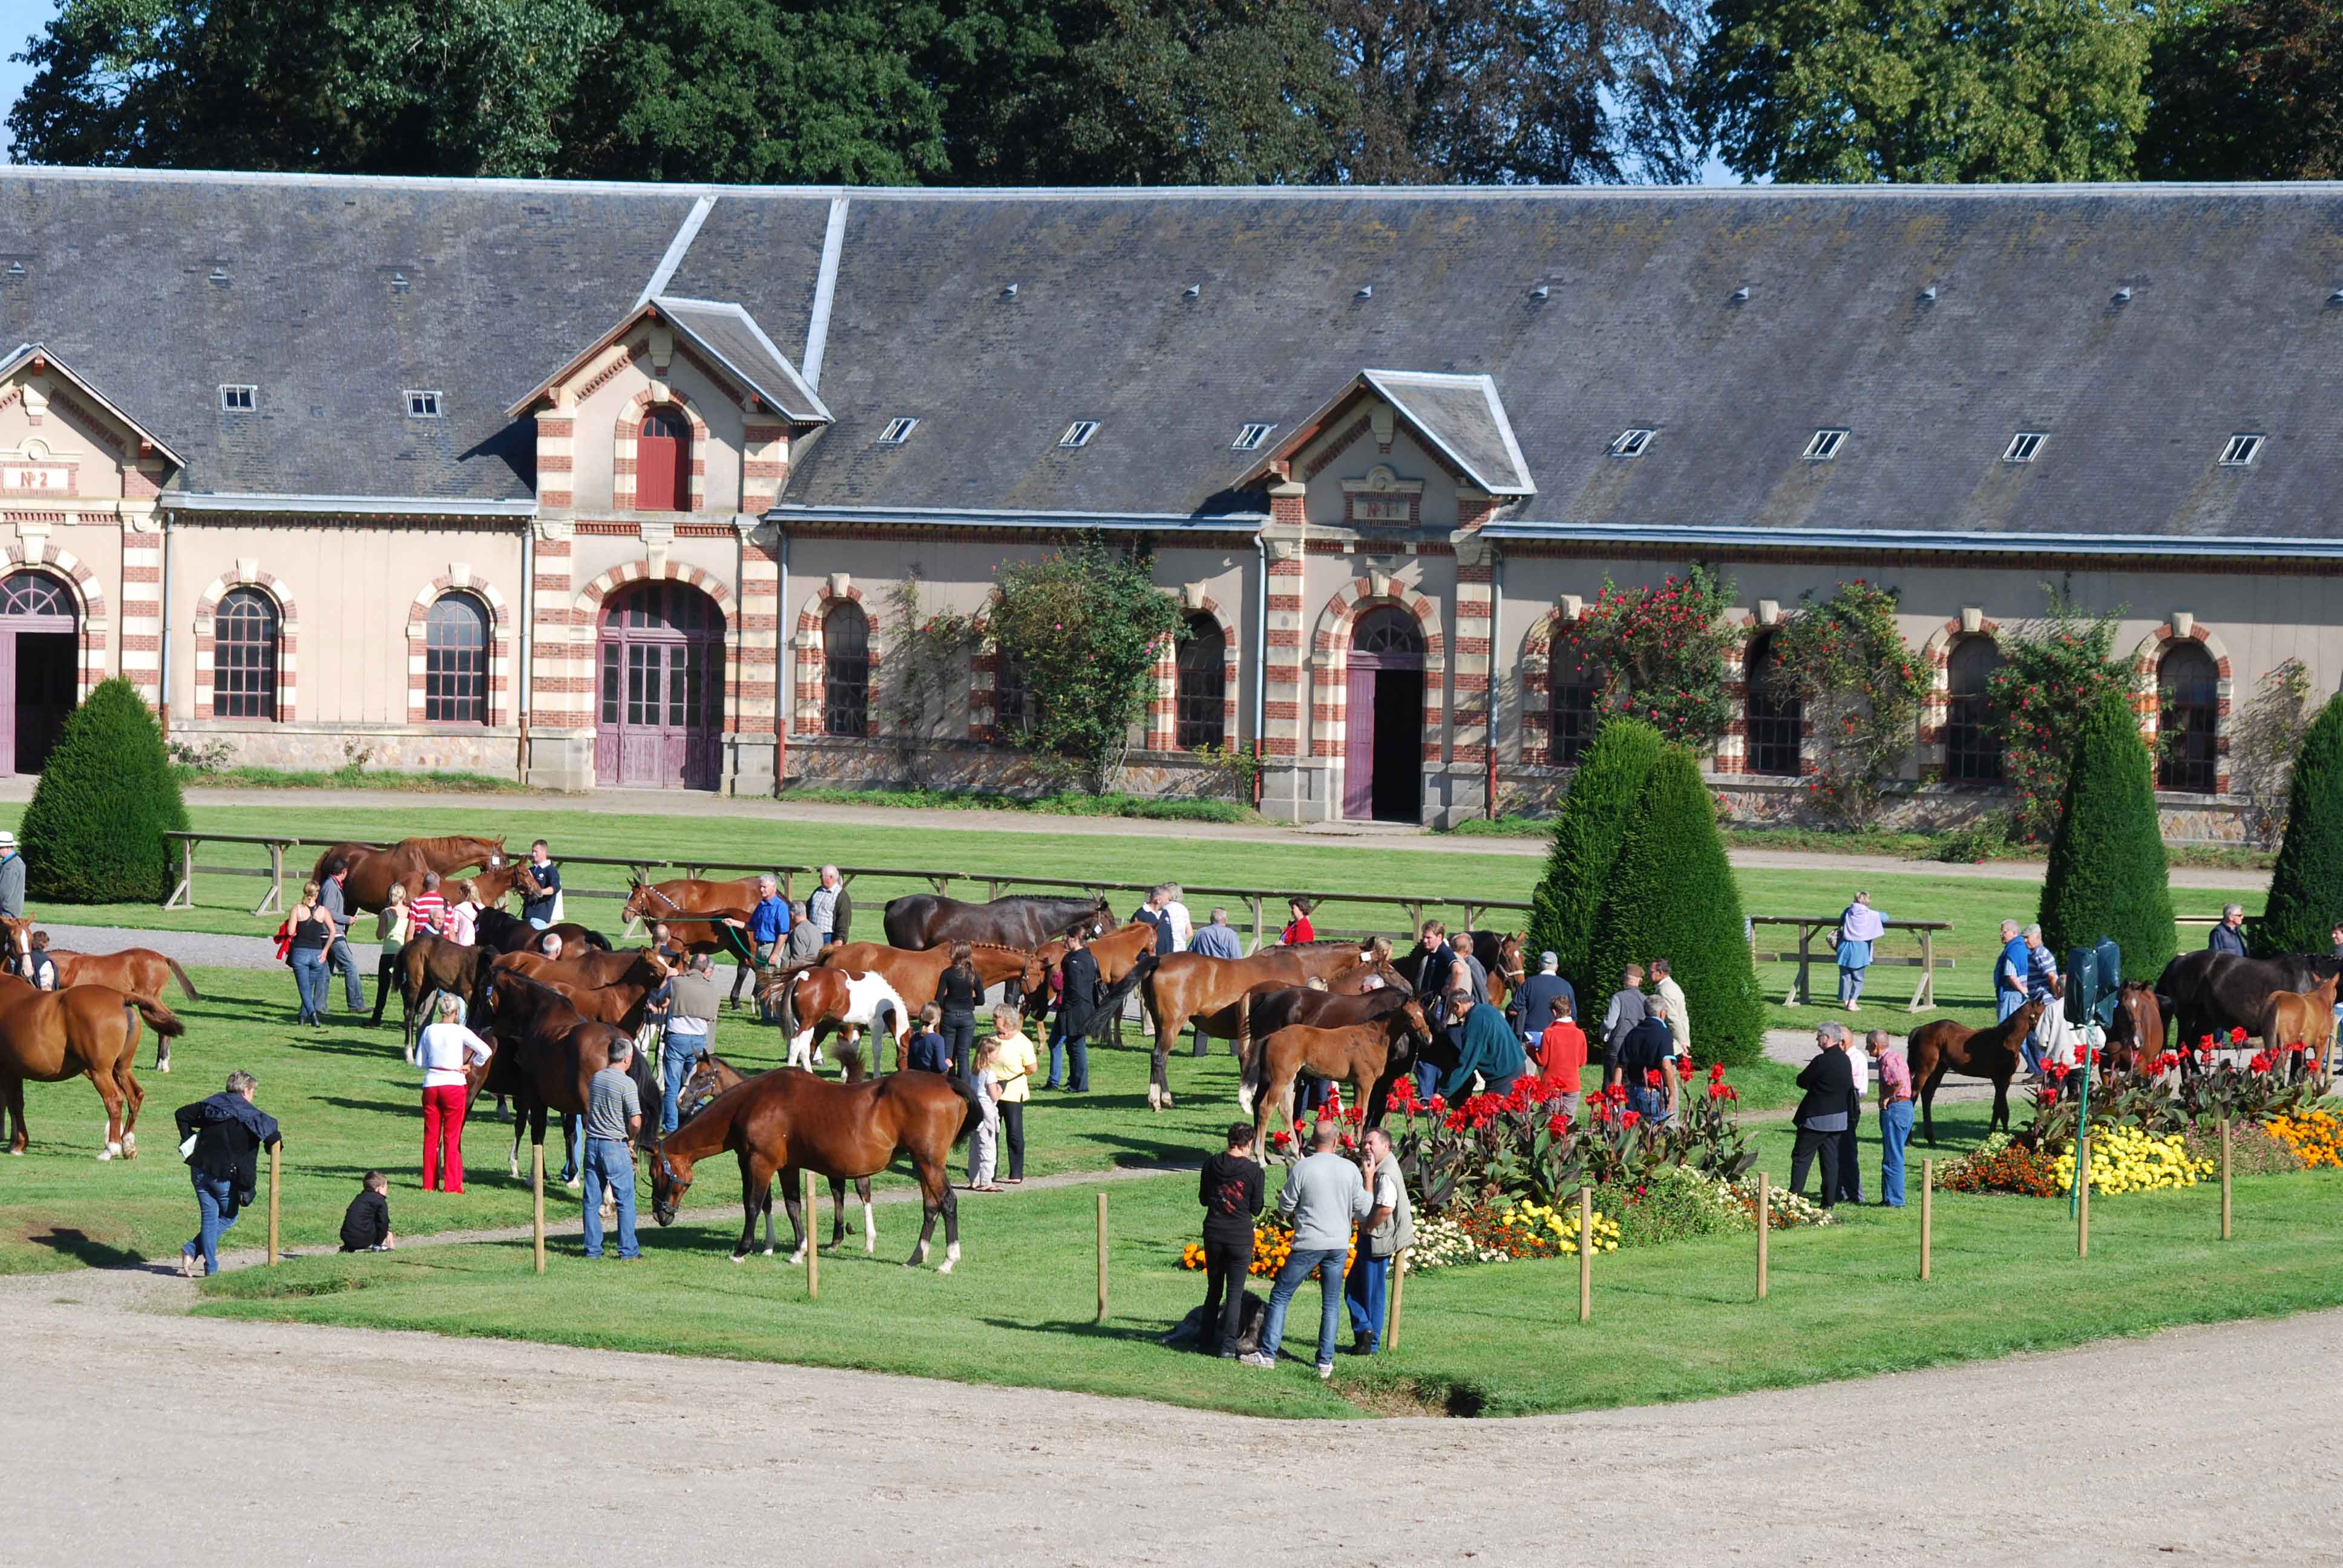 What are the regulations governing equestrian gatherings